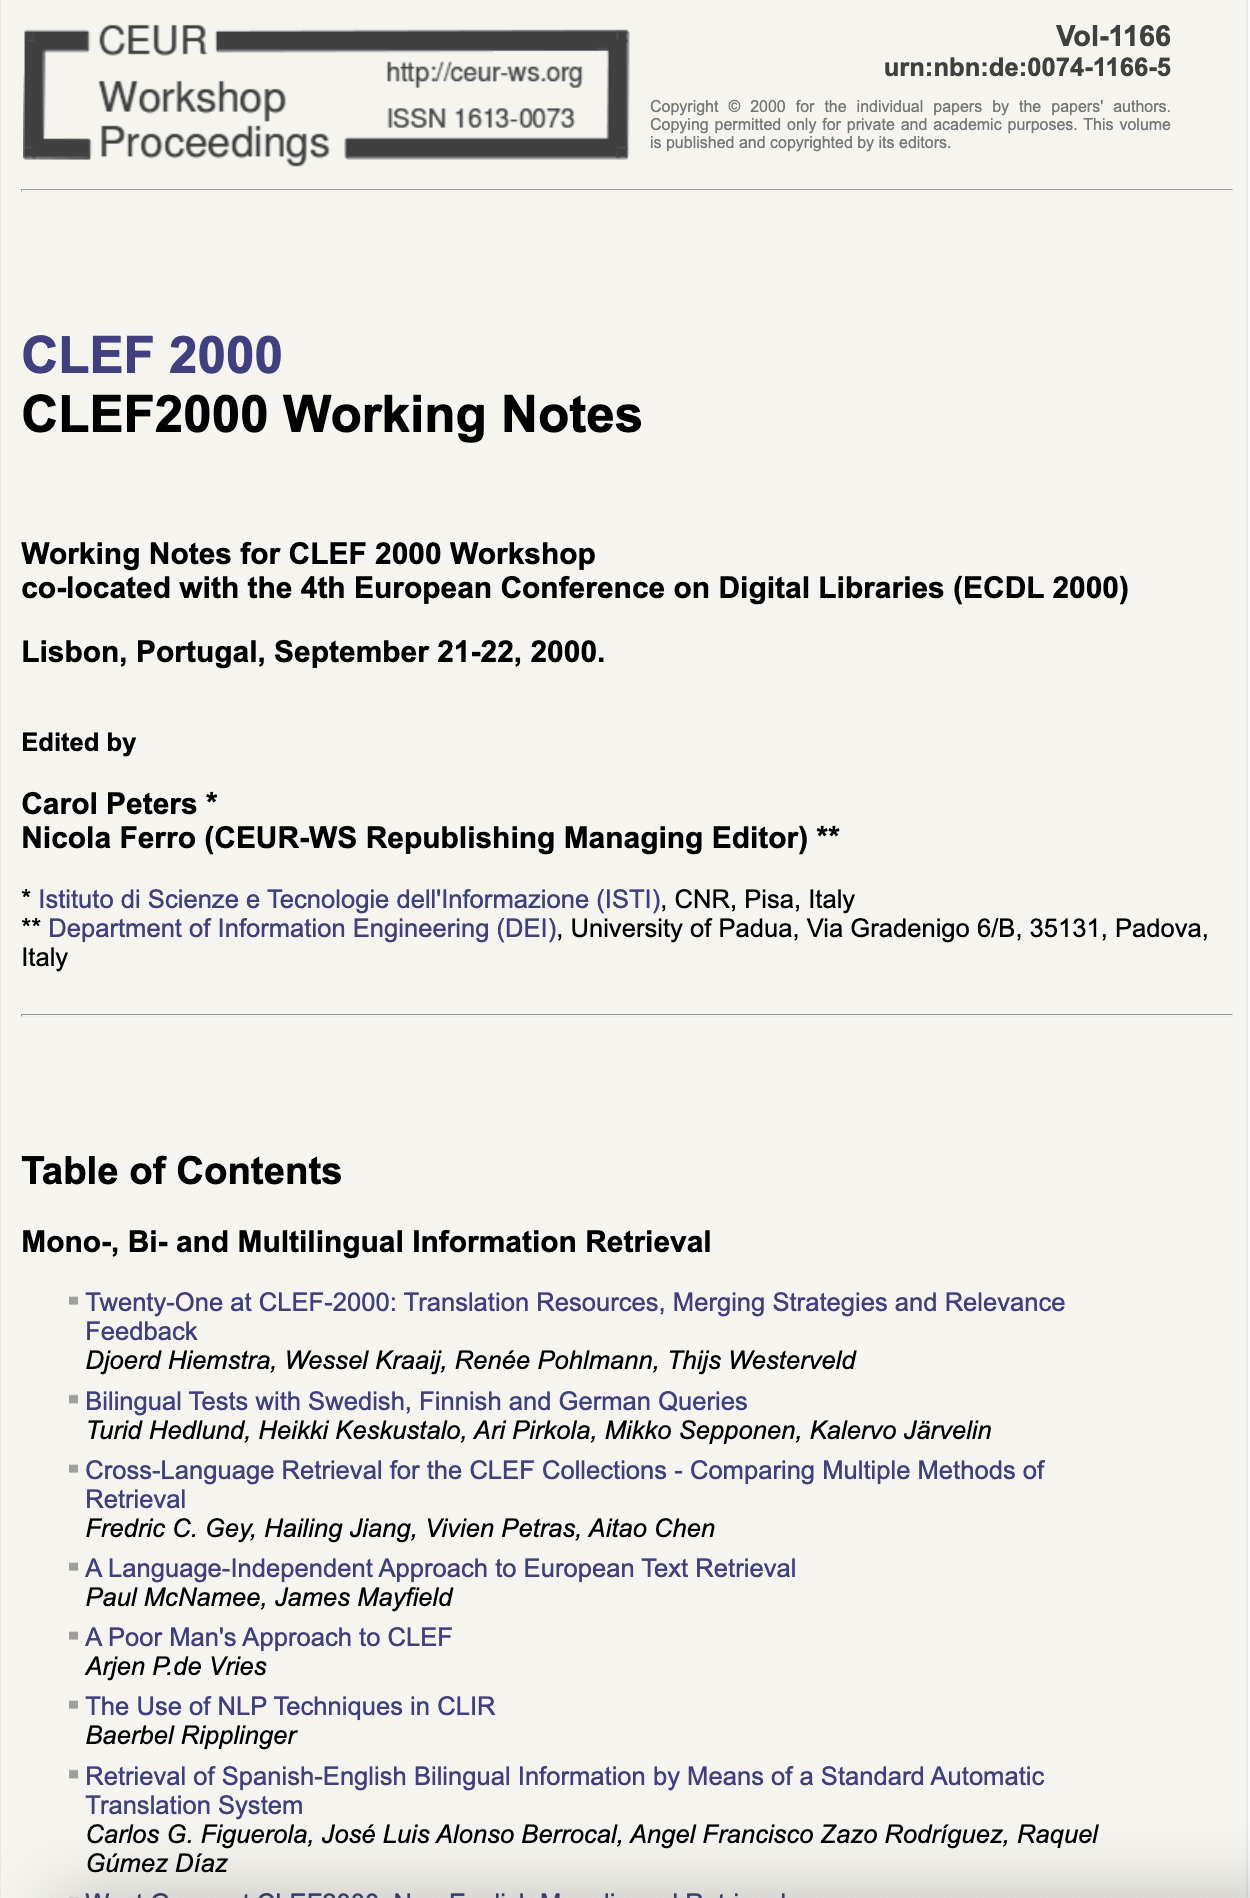 CLEF 2000 CEUR-WS Working Notes page